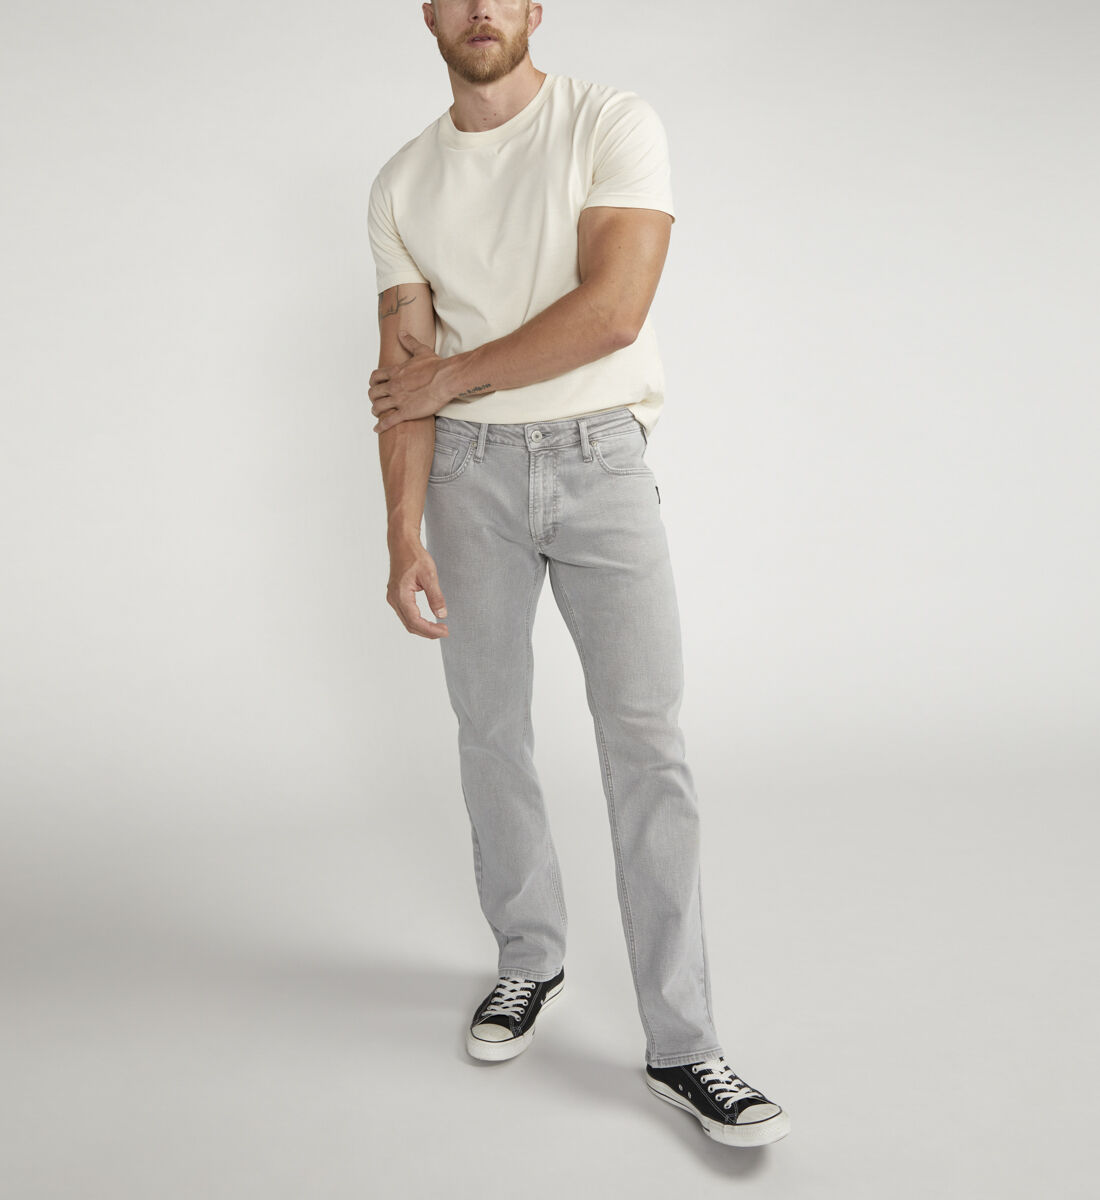 Silver Jeans Co. | In The Mix | Mens